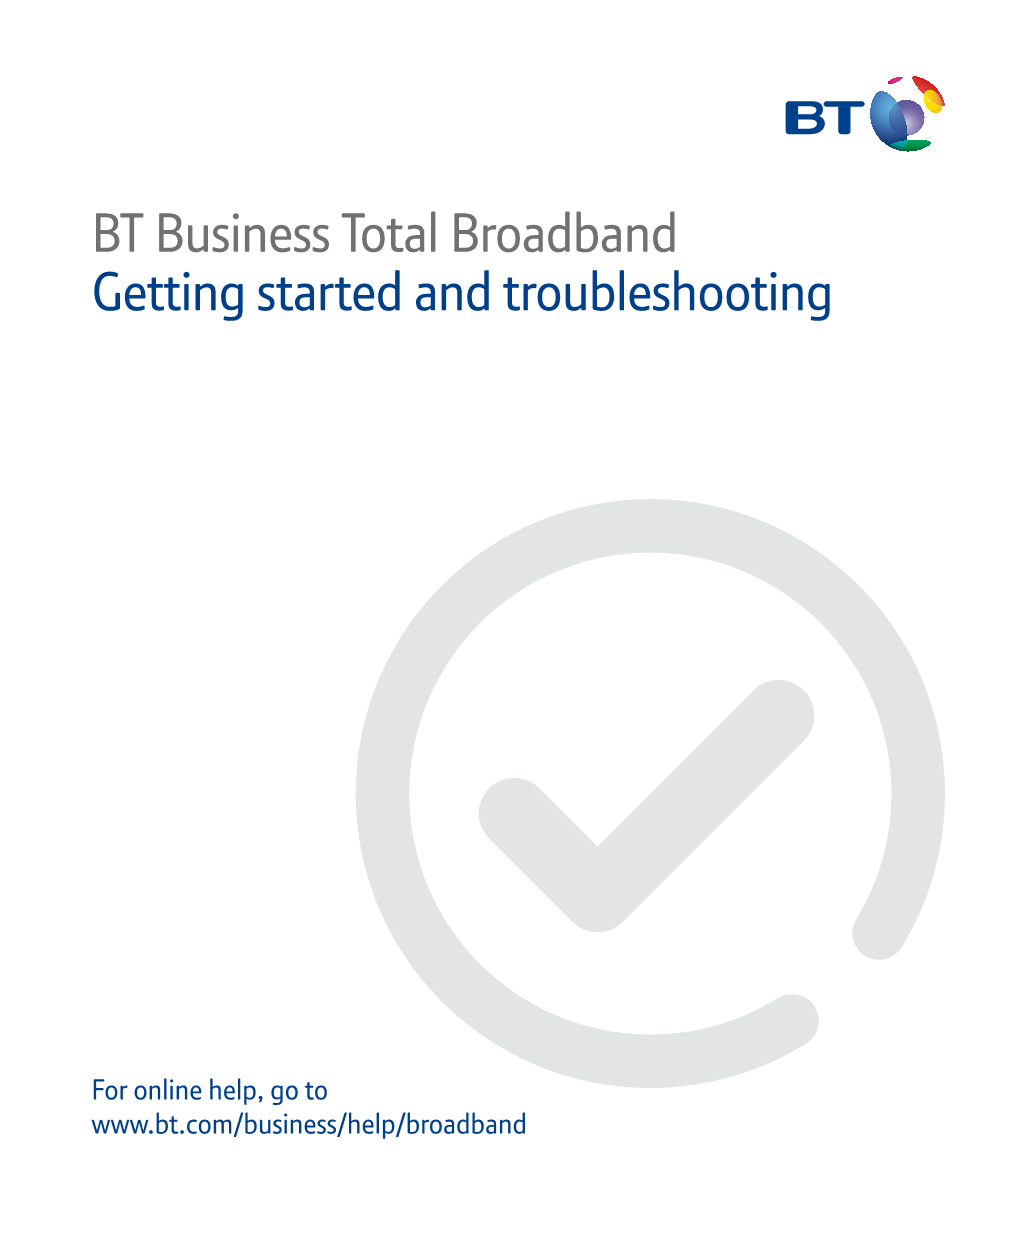 BT Business Total Broadband Getting Started and Troubleshooting